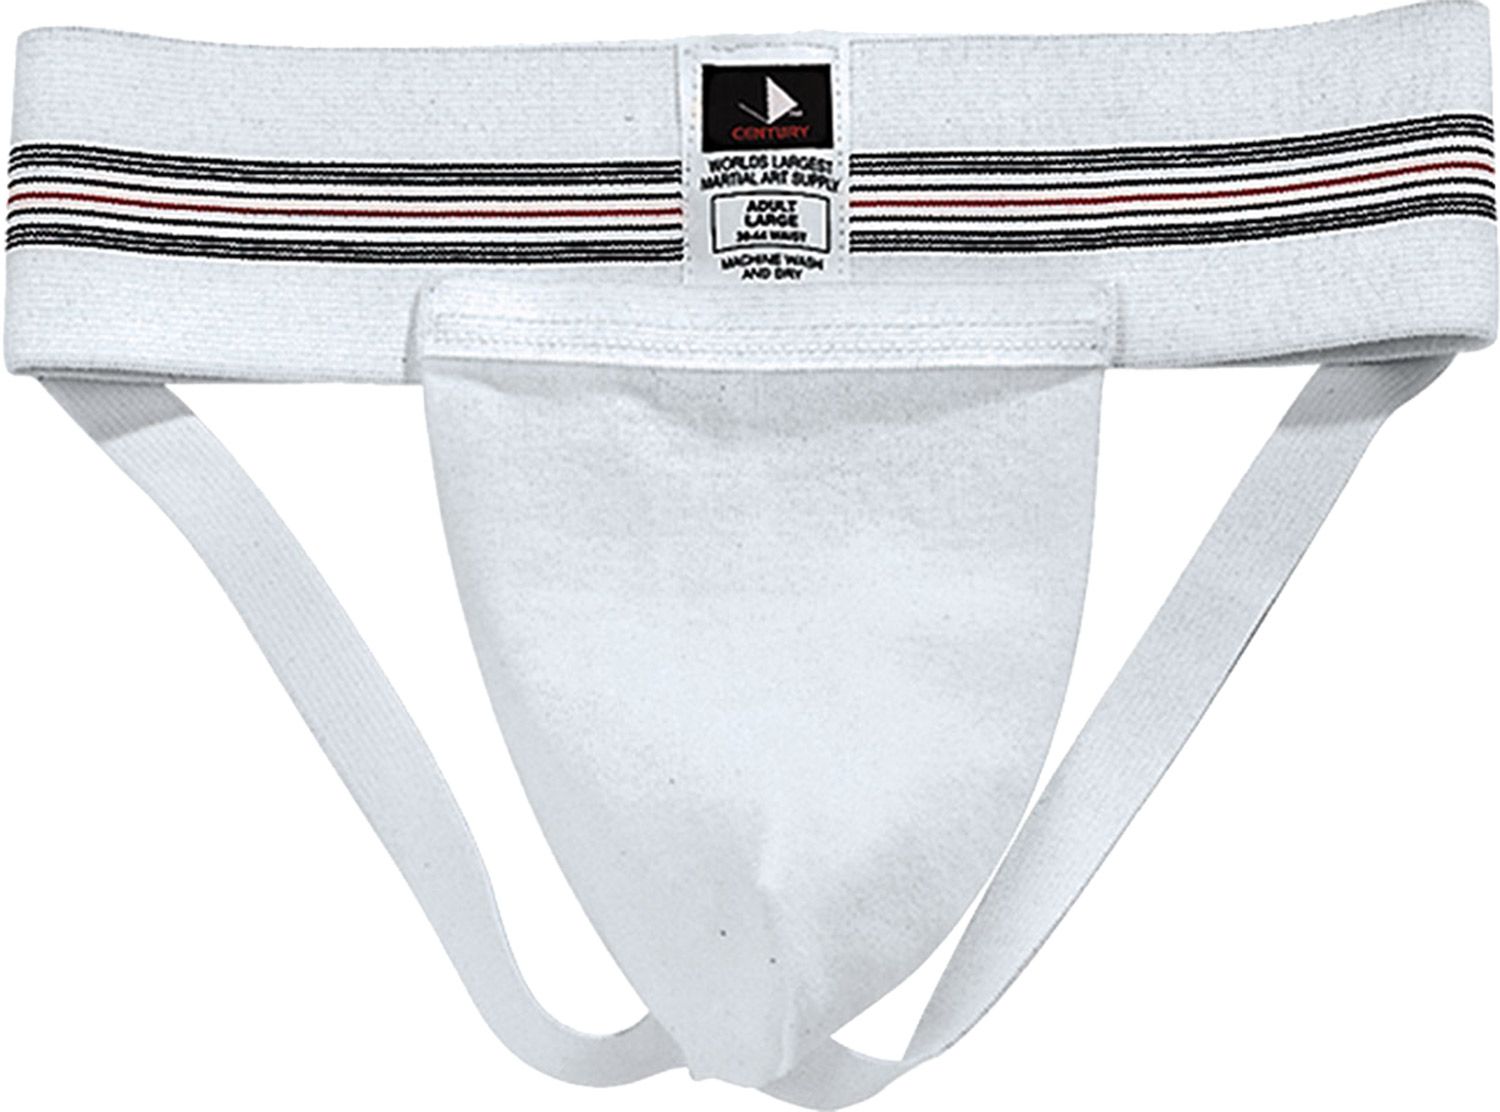 xxl athletic supporter